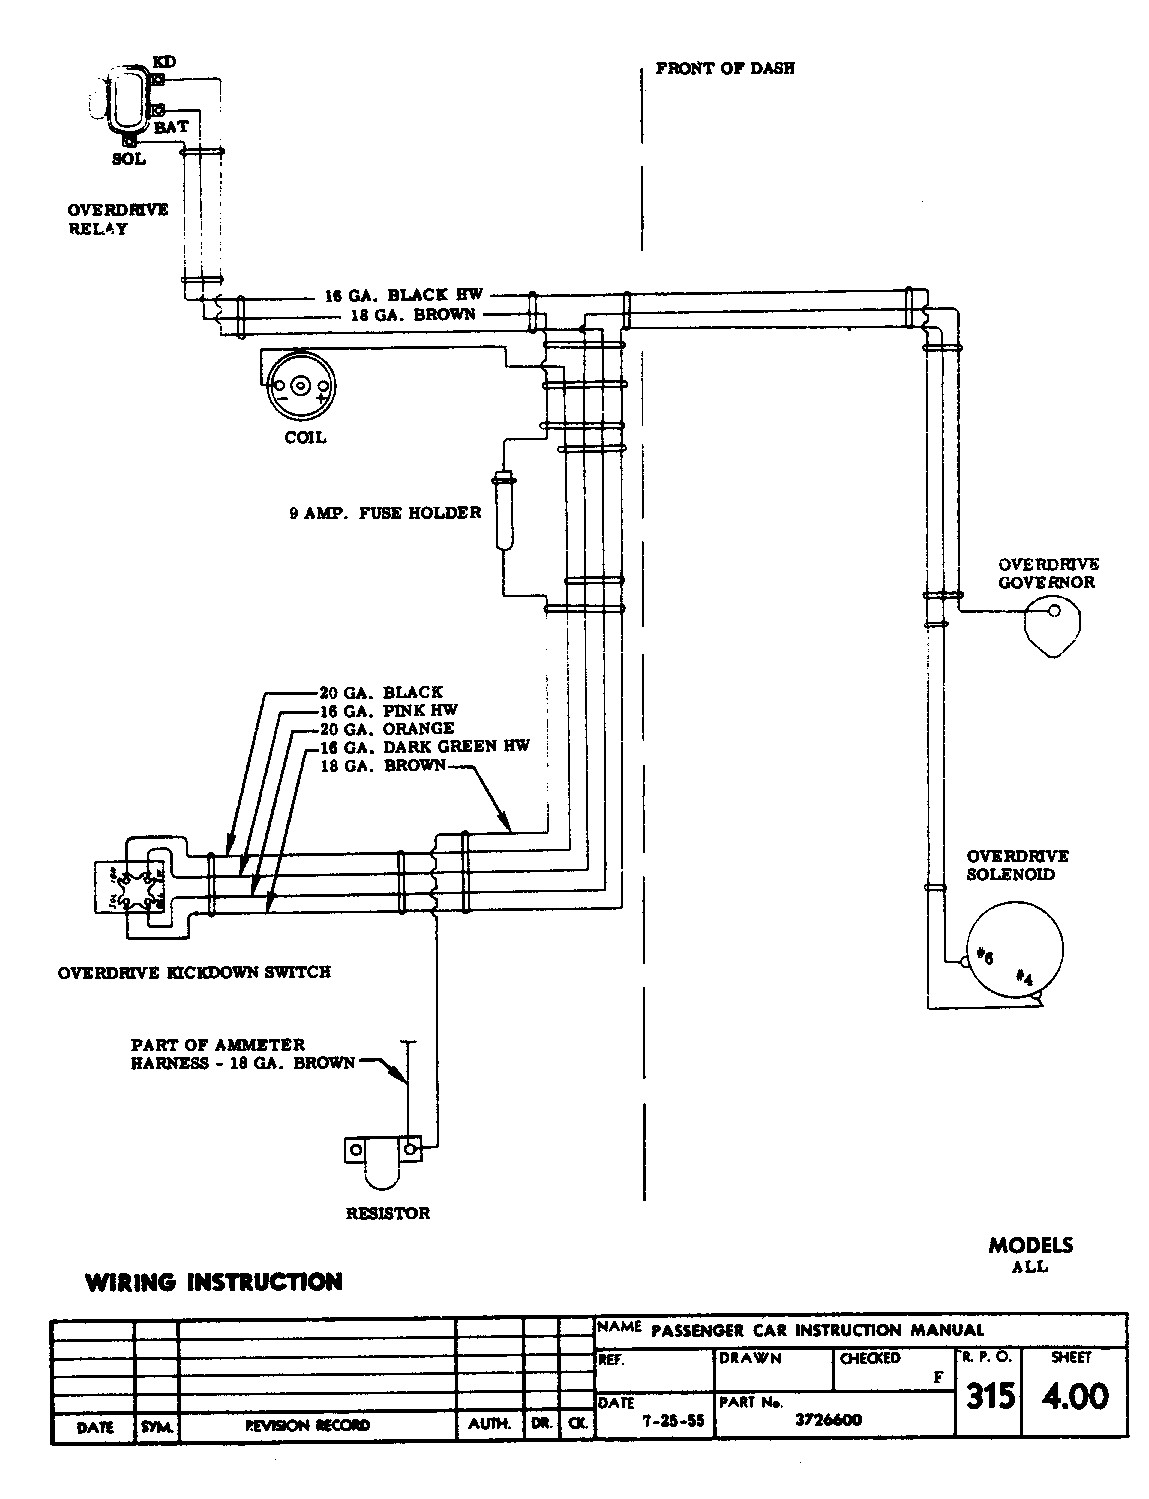 Voltage Regulator Wiring Diagram Chevy Collection You can then either turn the switch off and